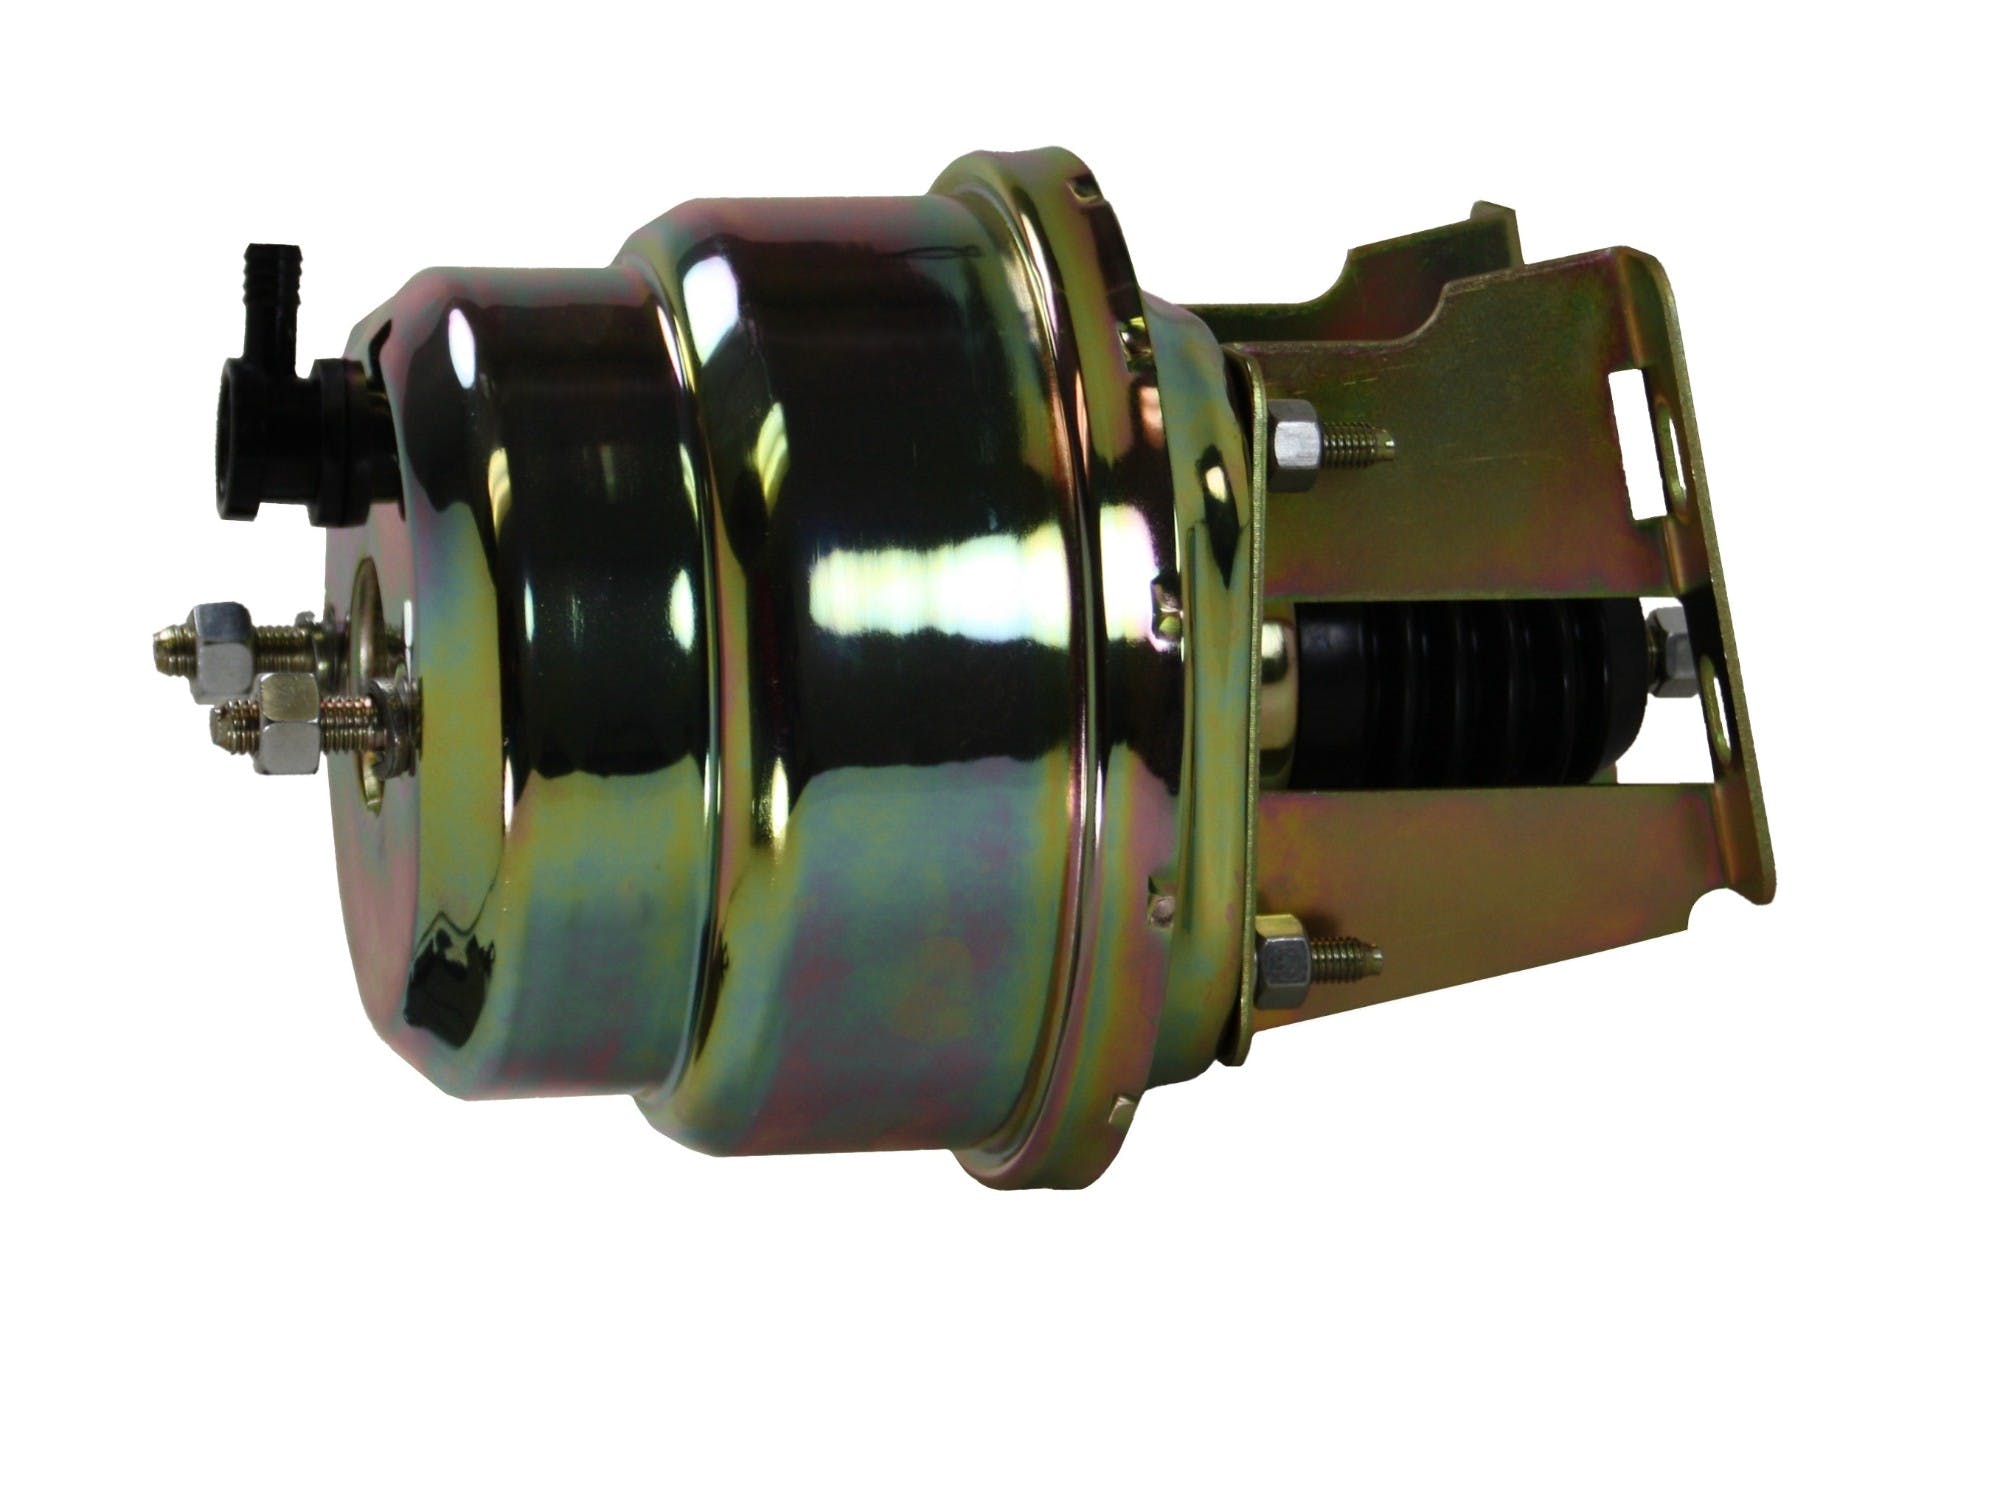 LEED Brakes 3S 7 in Dual Power Booster